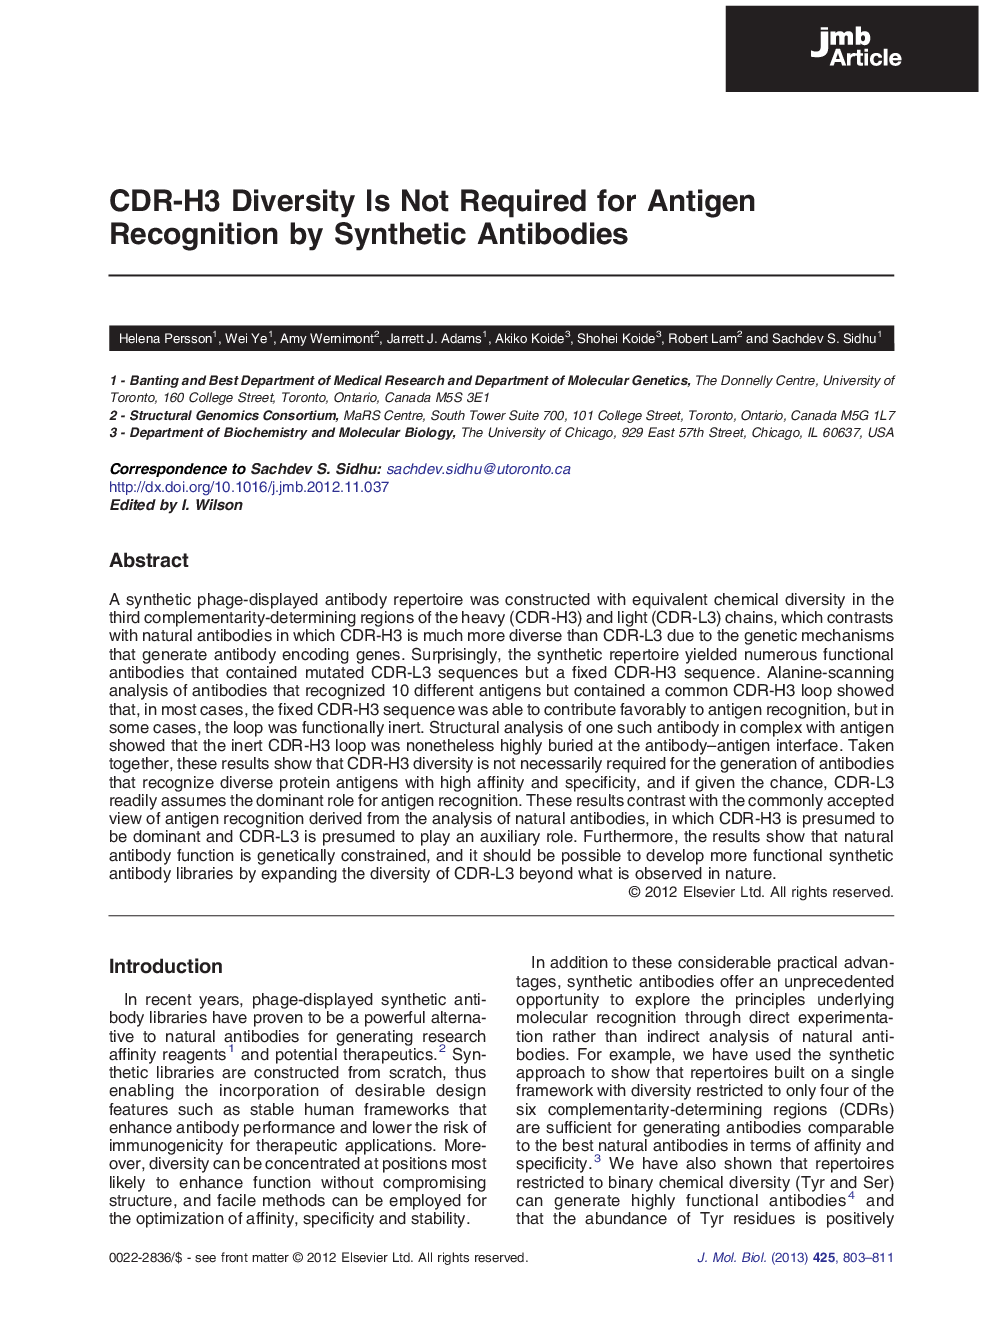 CDR-H3 Diversity Is Not Required for Antigen Recognition by Synthetic Antibodies